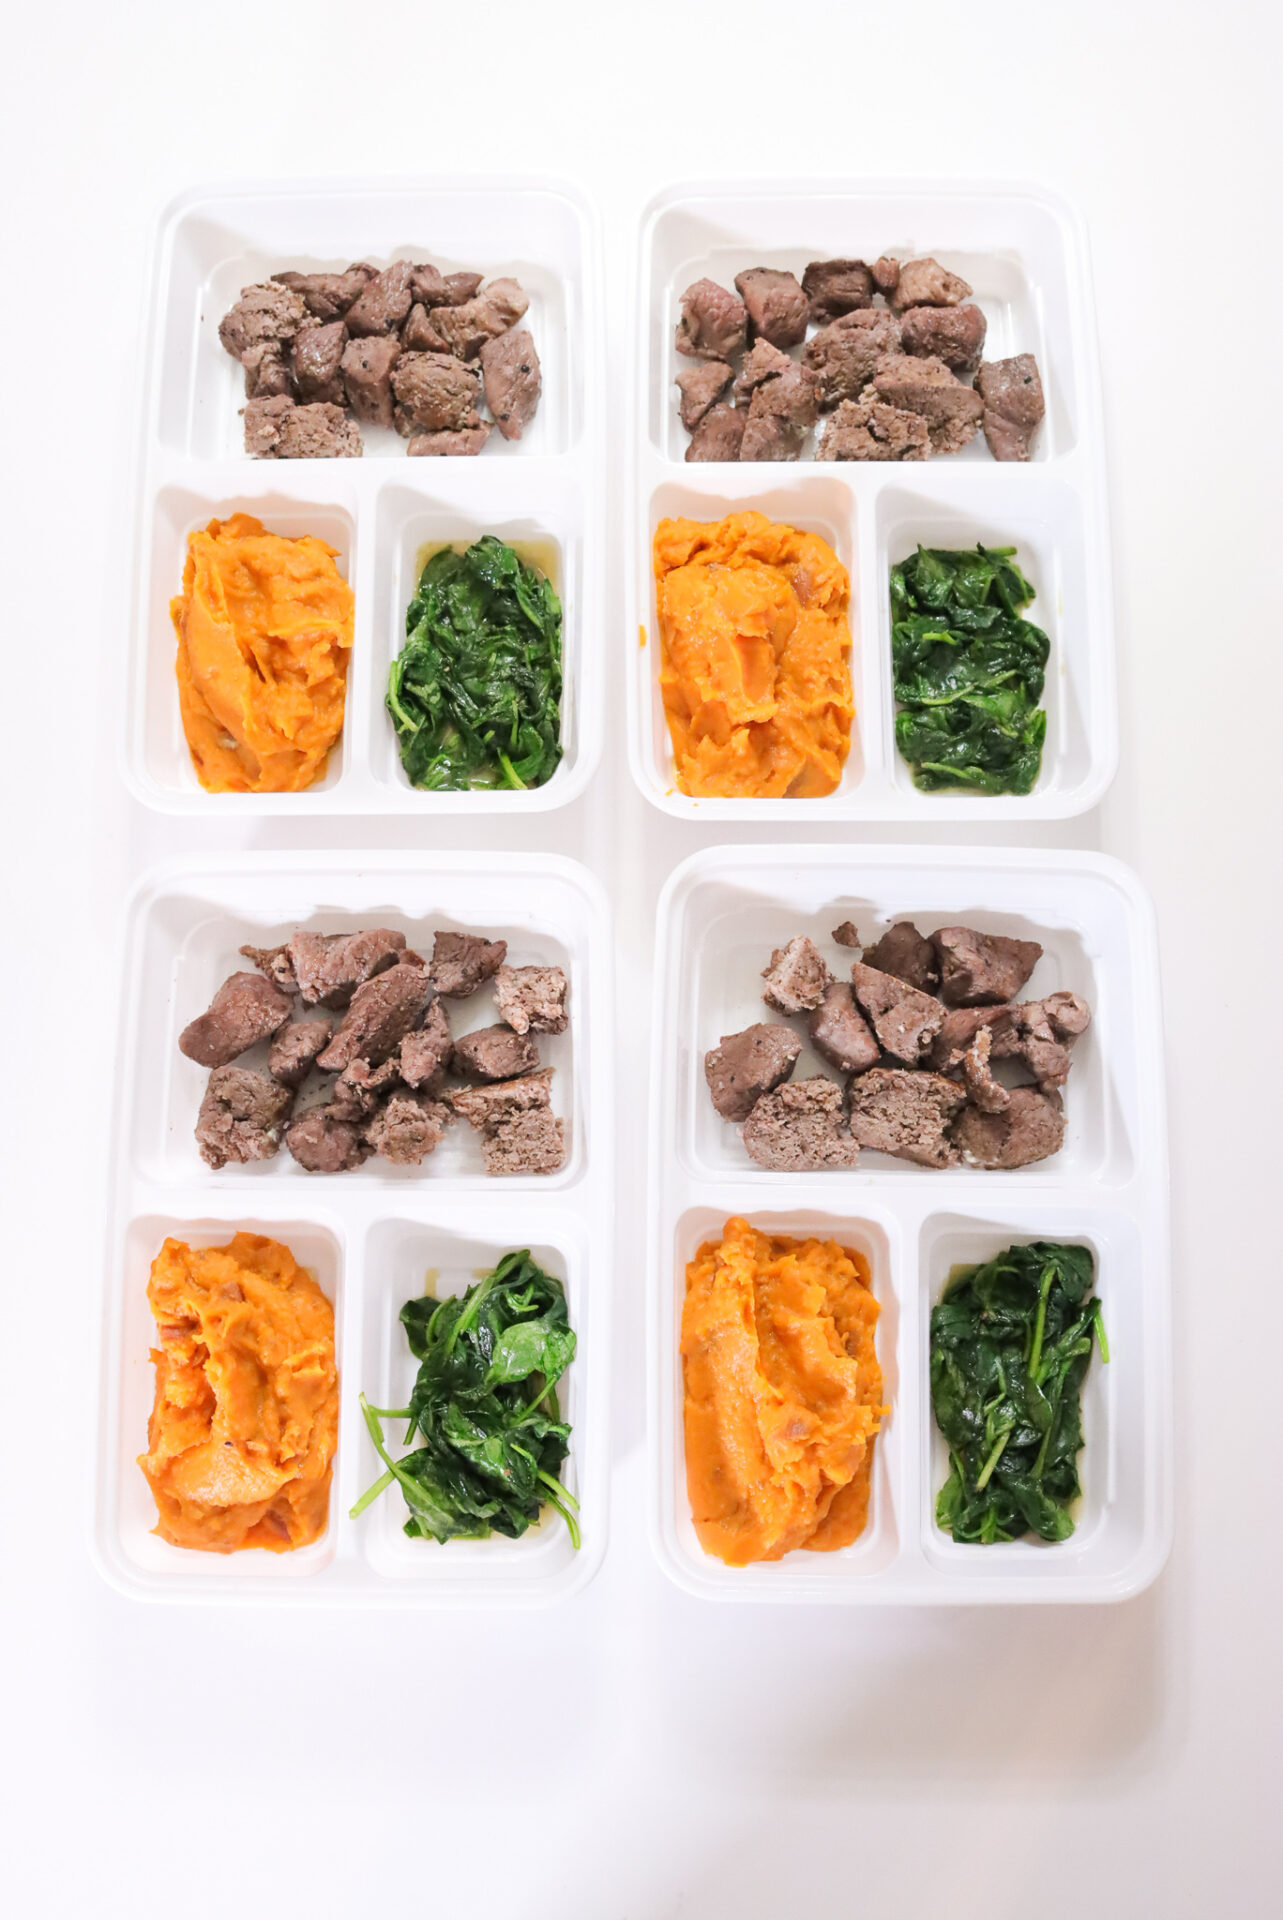 Steak, Spinach, Mashed Sweet Potatoes